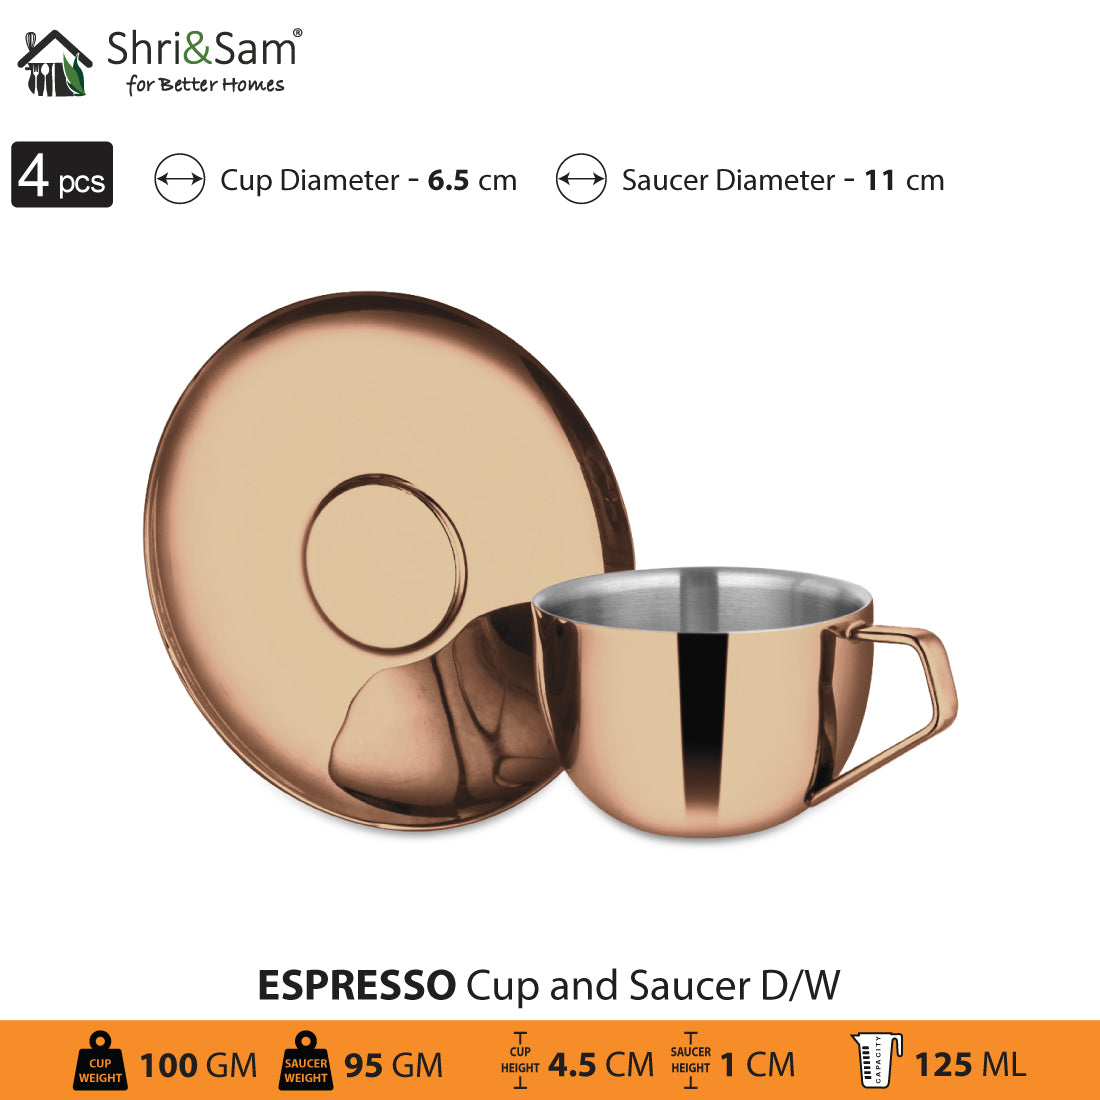 Stainless Steel 4 PCS Double Wall Cup and Saucer with Rose Gold PVD Coating Espresso